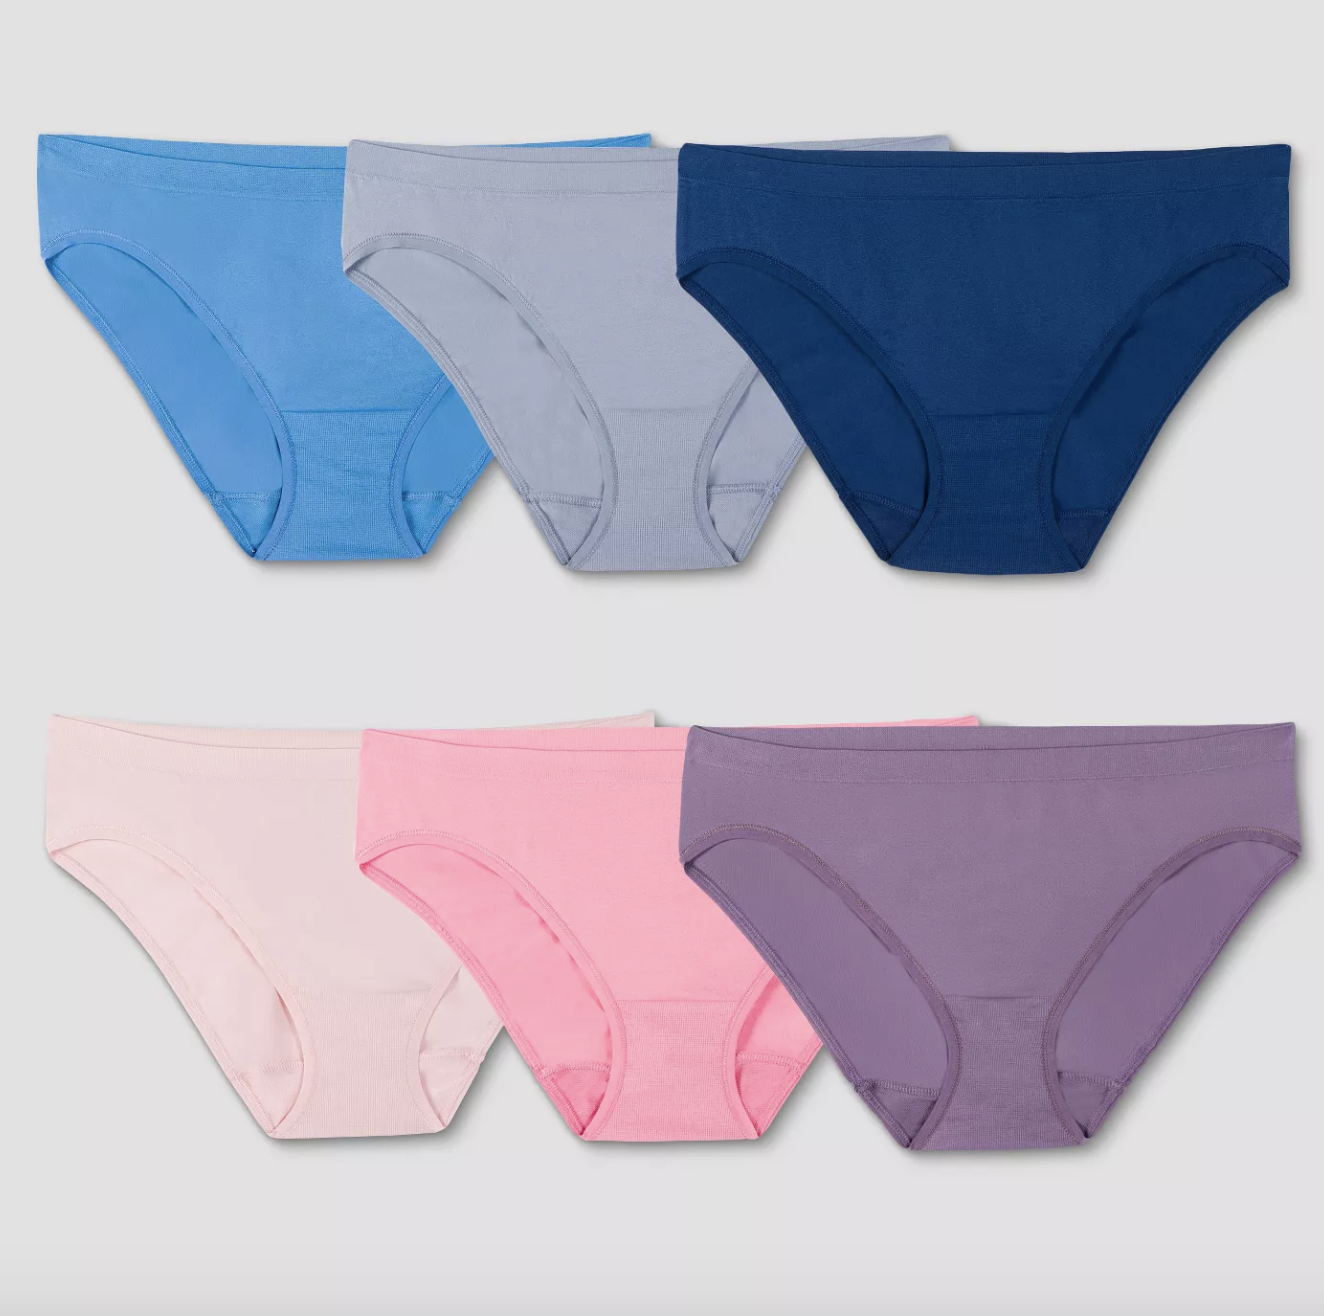 Six colorful pairs of underwear